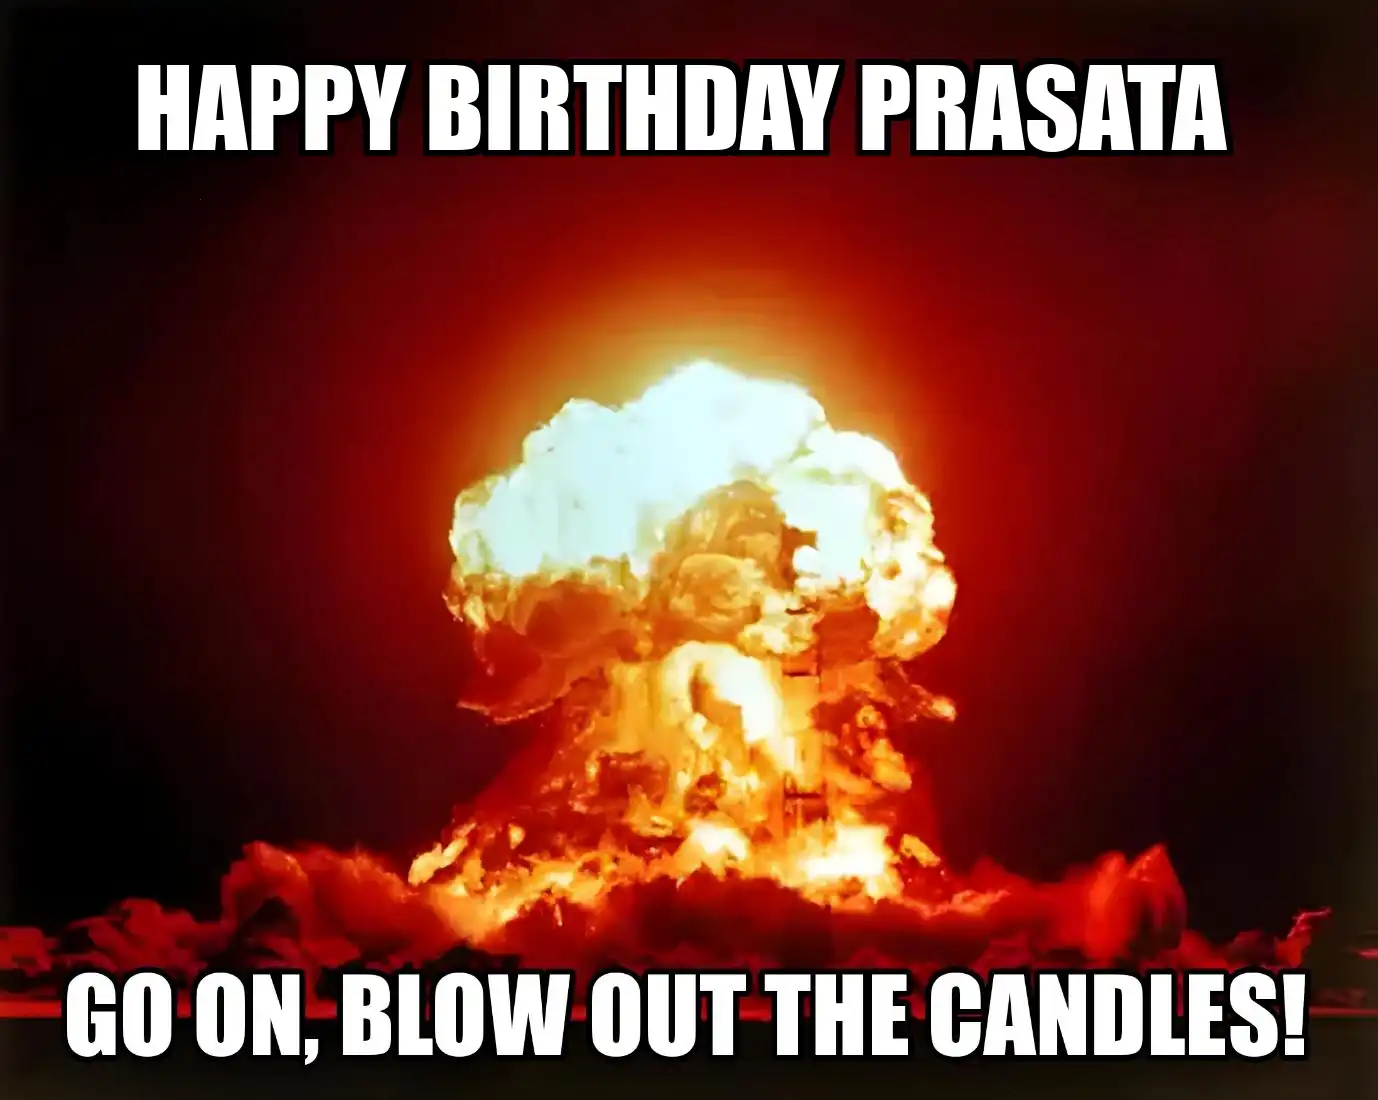 Happy Birthday Prasata Go On Blow Out The Candles Meme